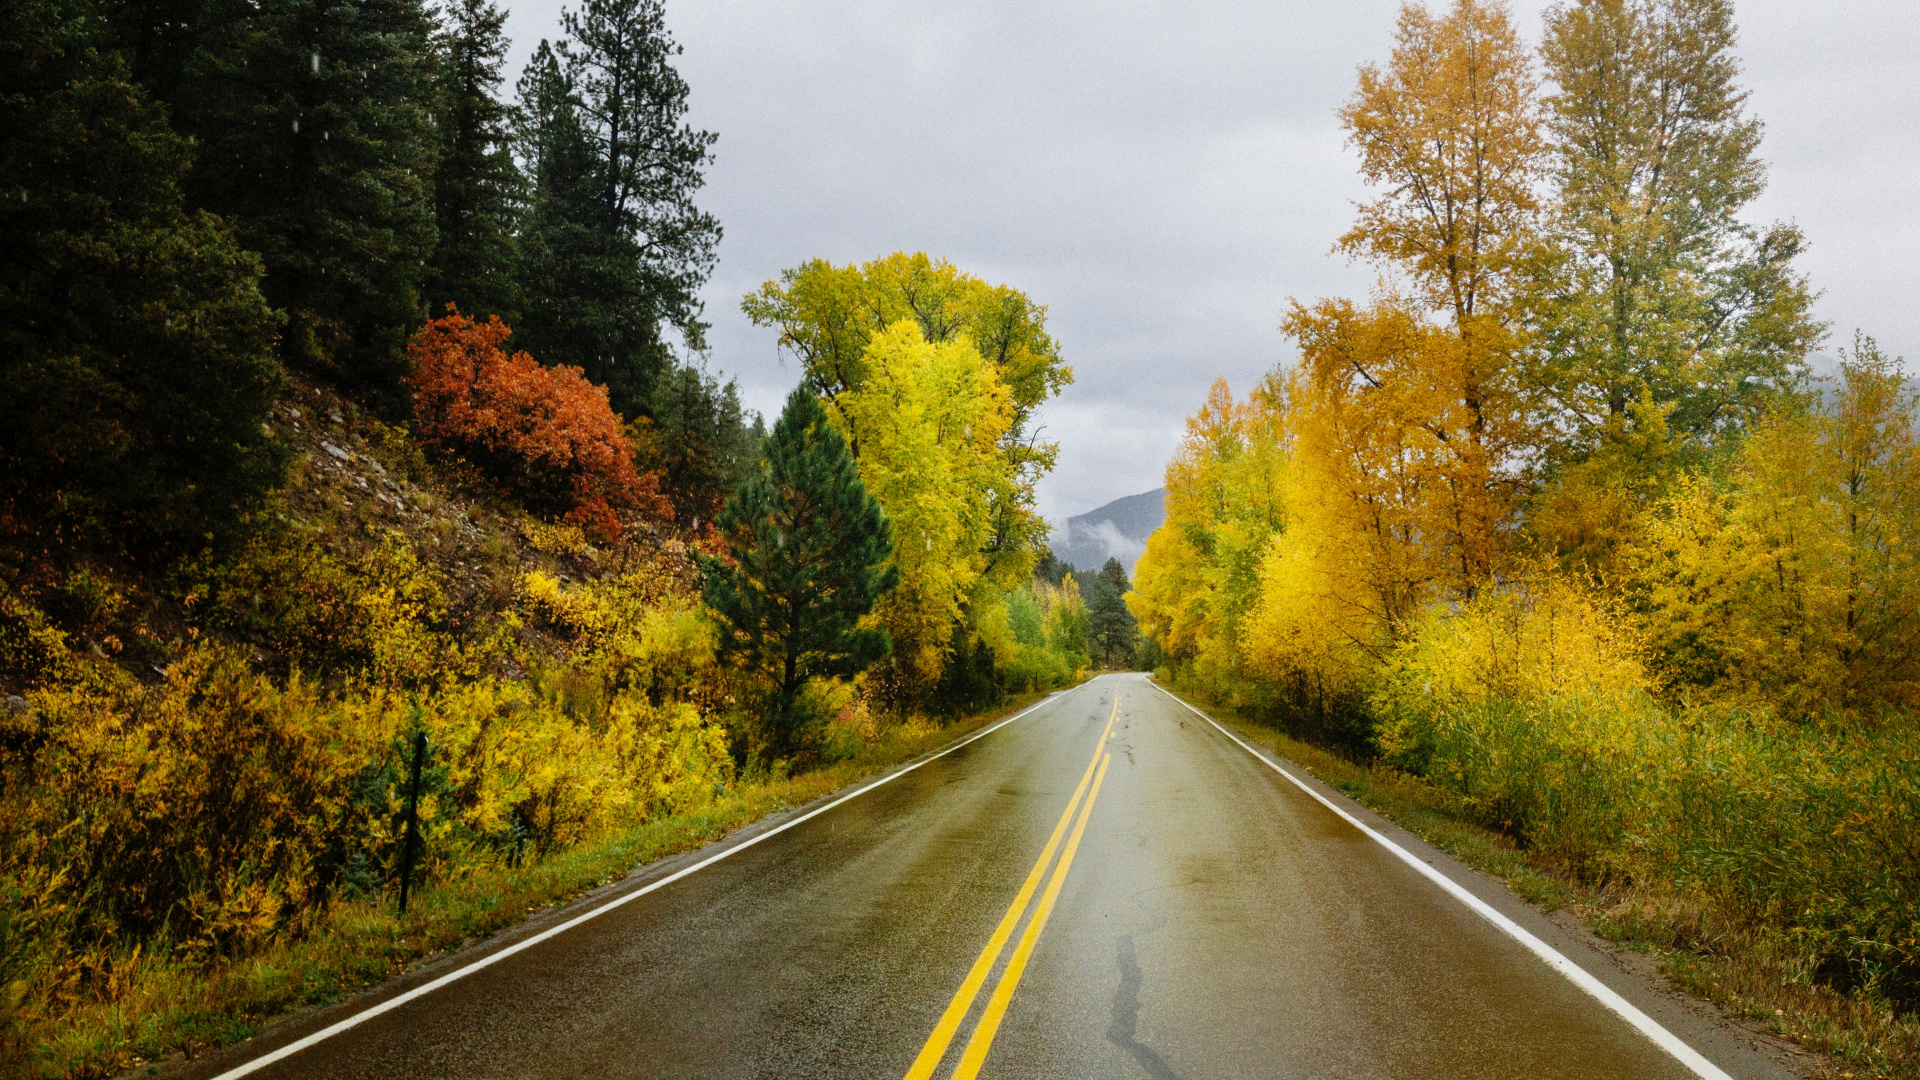 Download Autumn, highway, lone, yellow marks wallpaper, 1920x Full HD, HDTV, FHD, 1080p